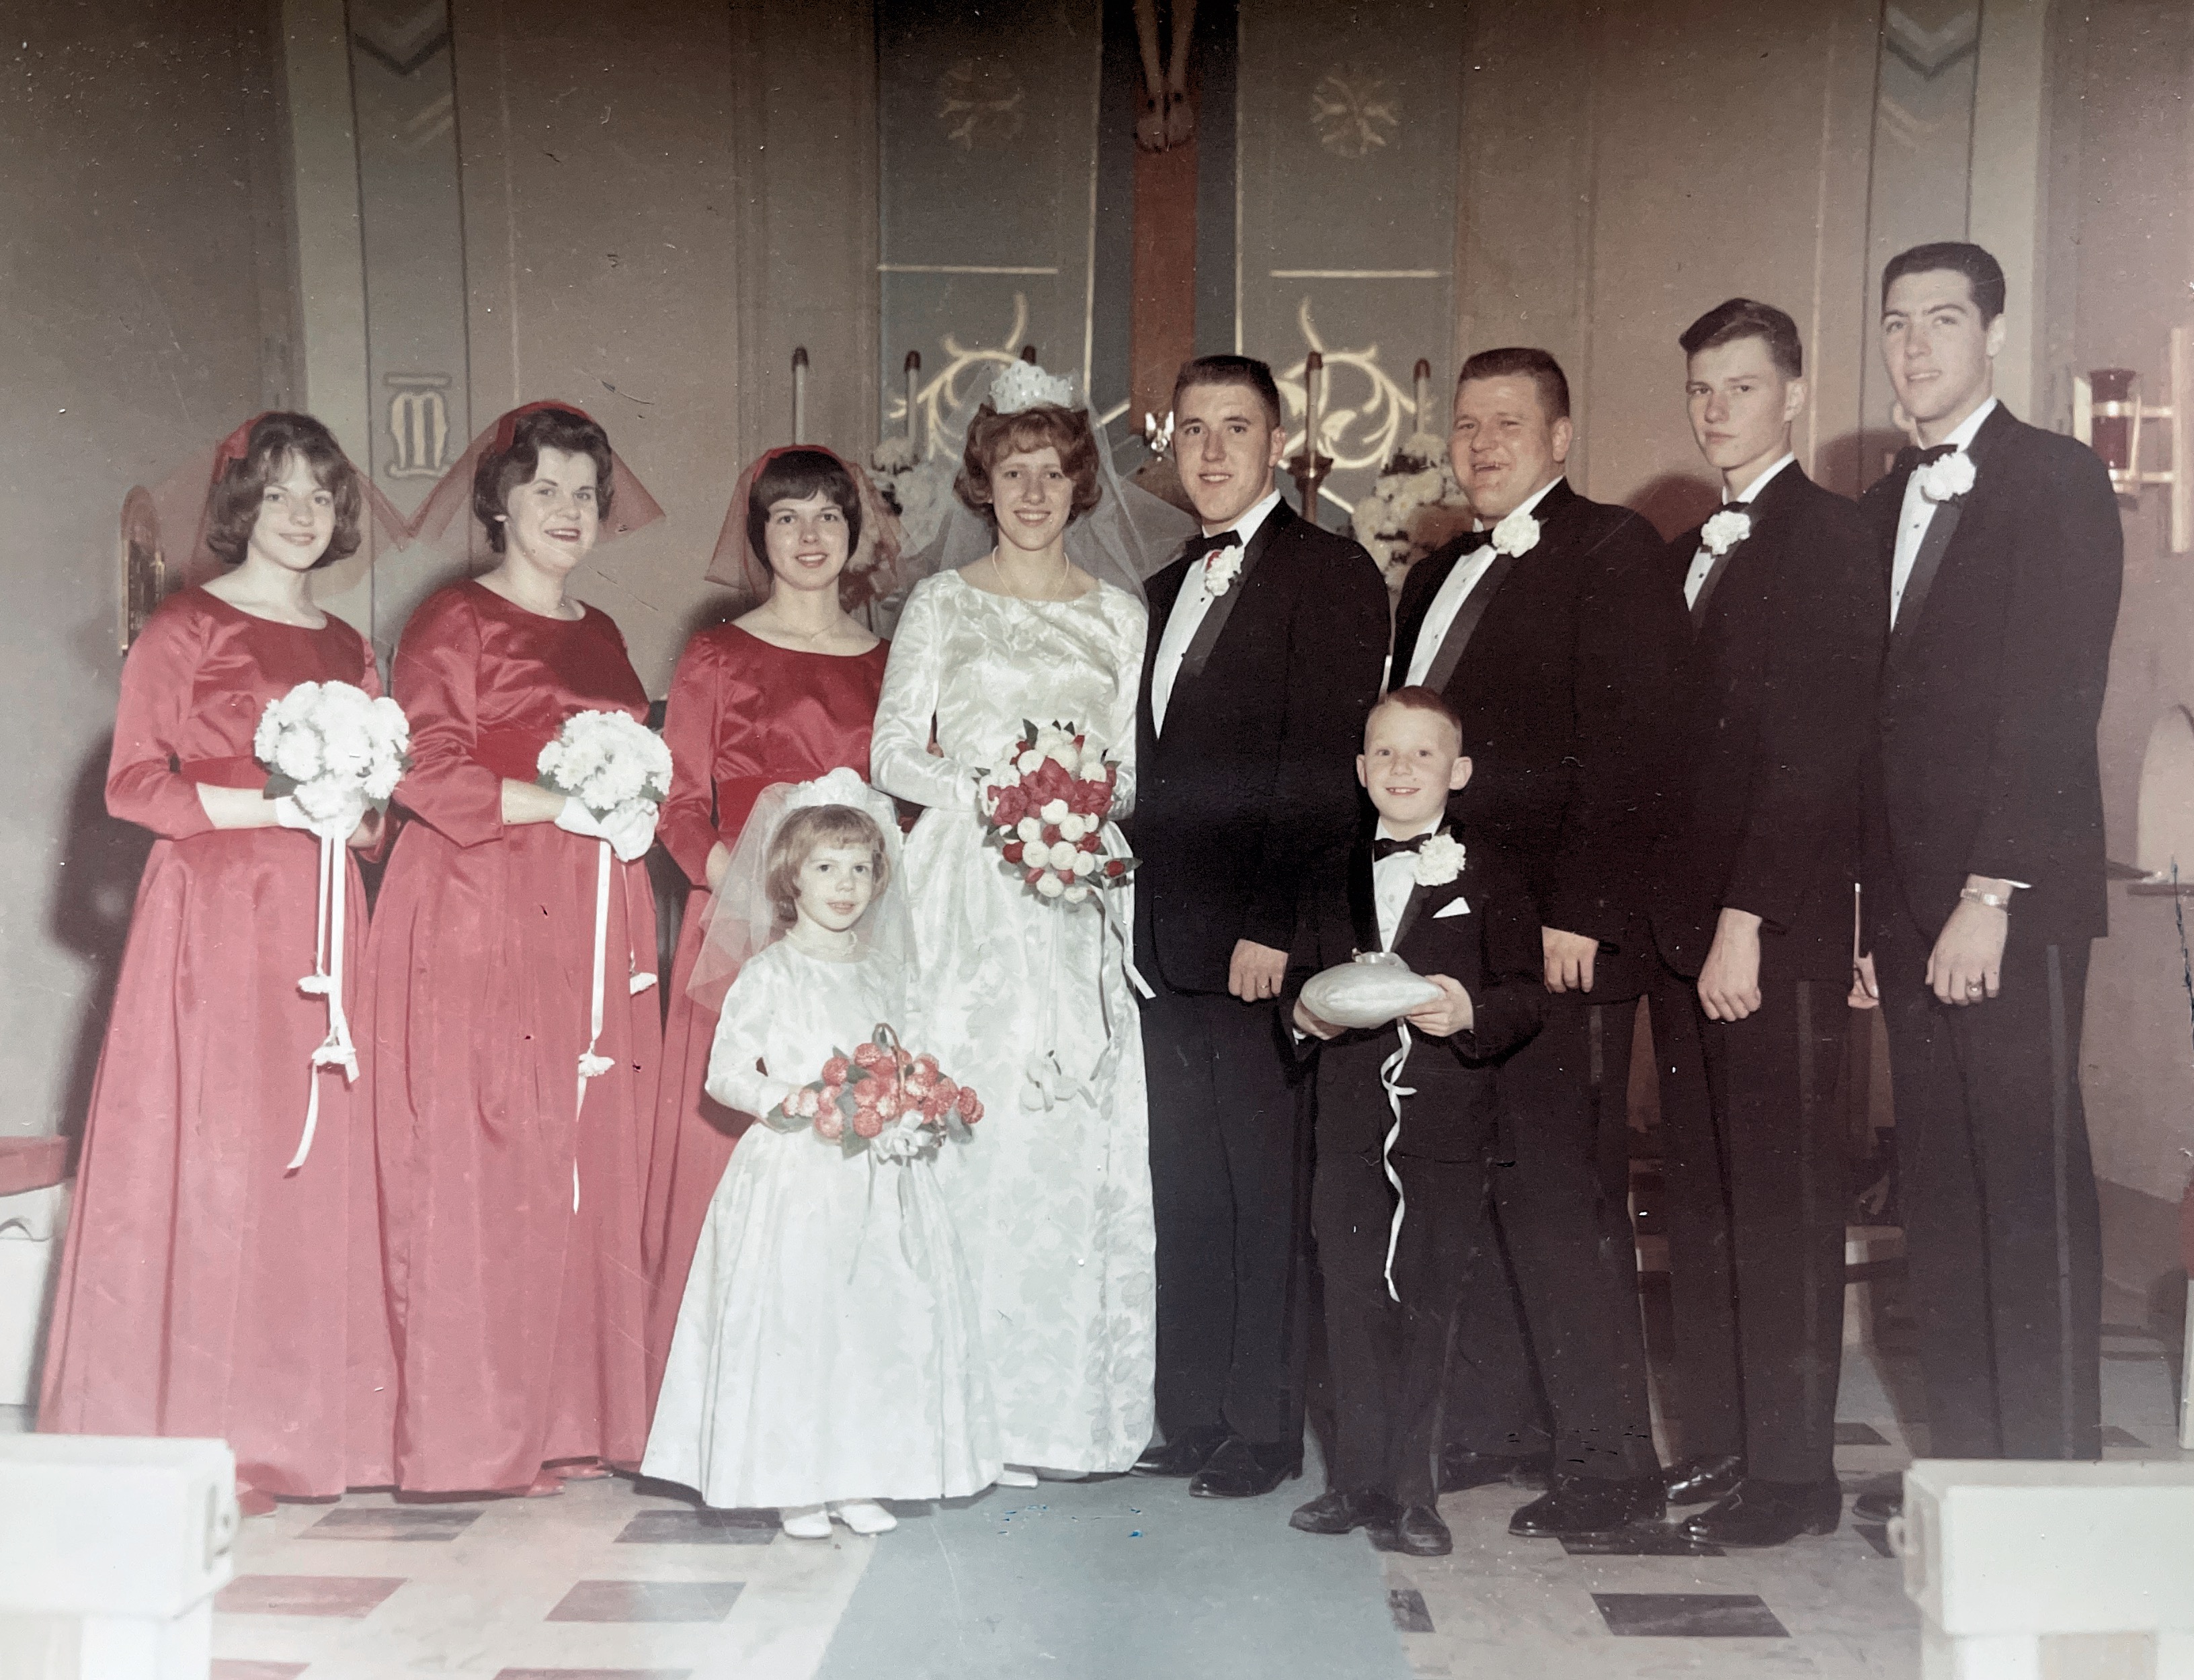 Wedding photo of Pat and Tom…..11/28/1964